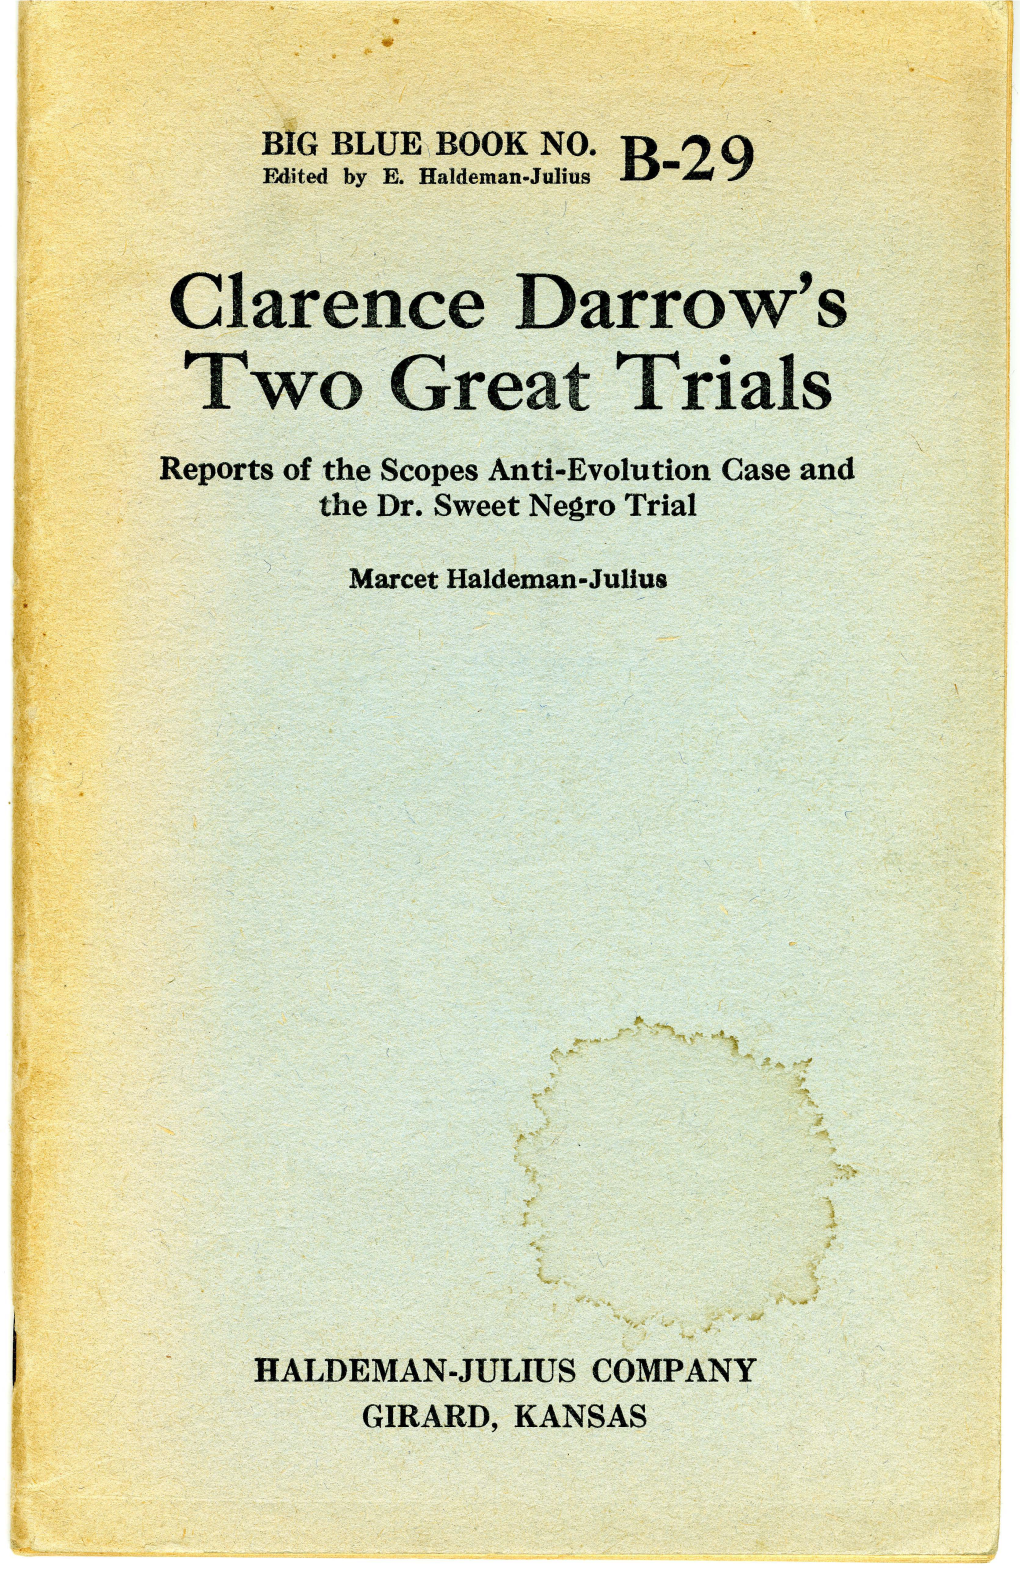 Clarence Darrow's Two Grea't Trials Reports of the Scopes Anti-Evolution Case and the Dr